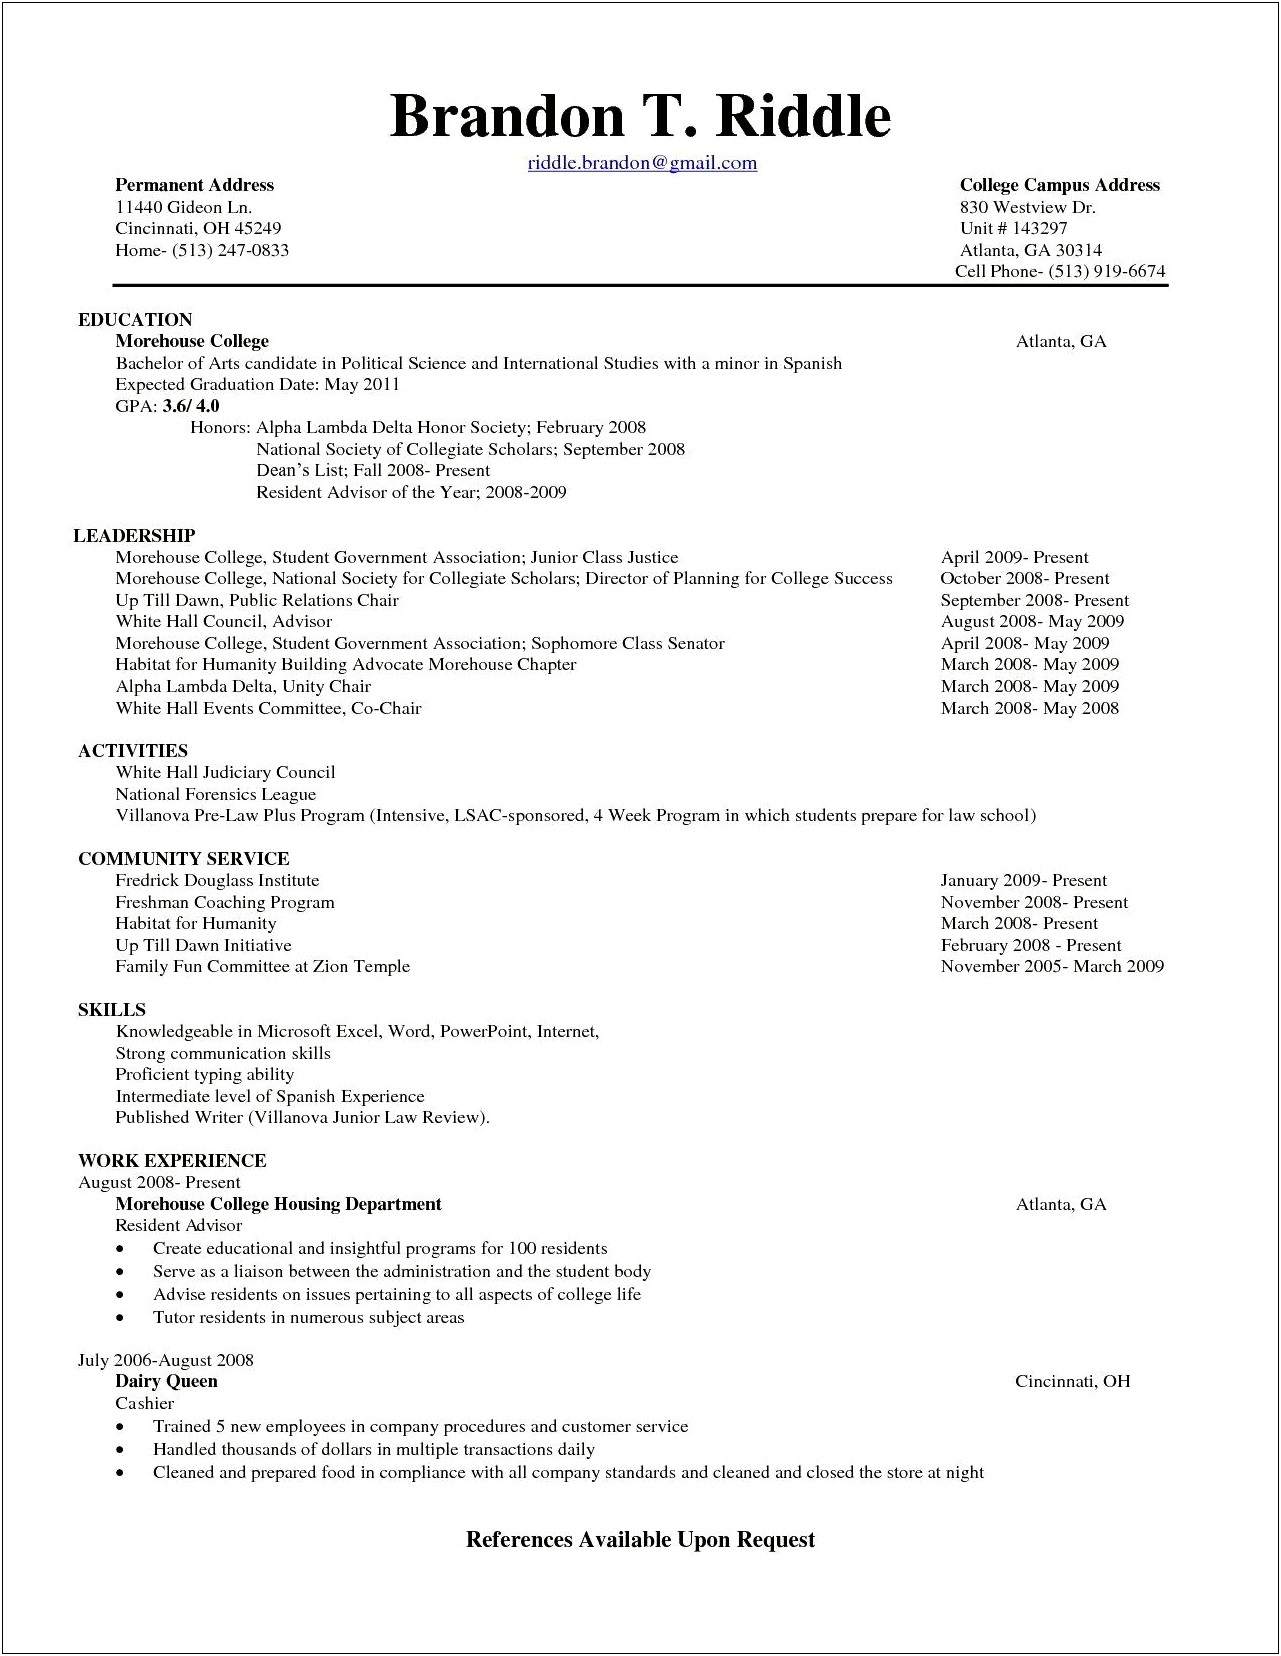 College Grad 3 Year Experience Resume